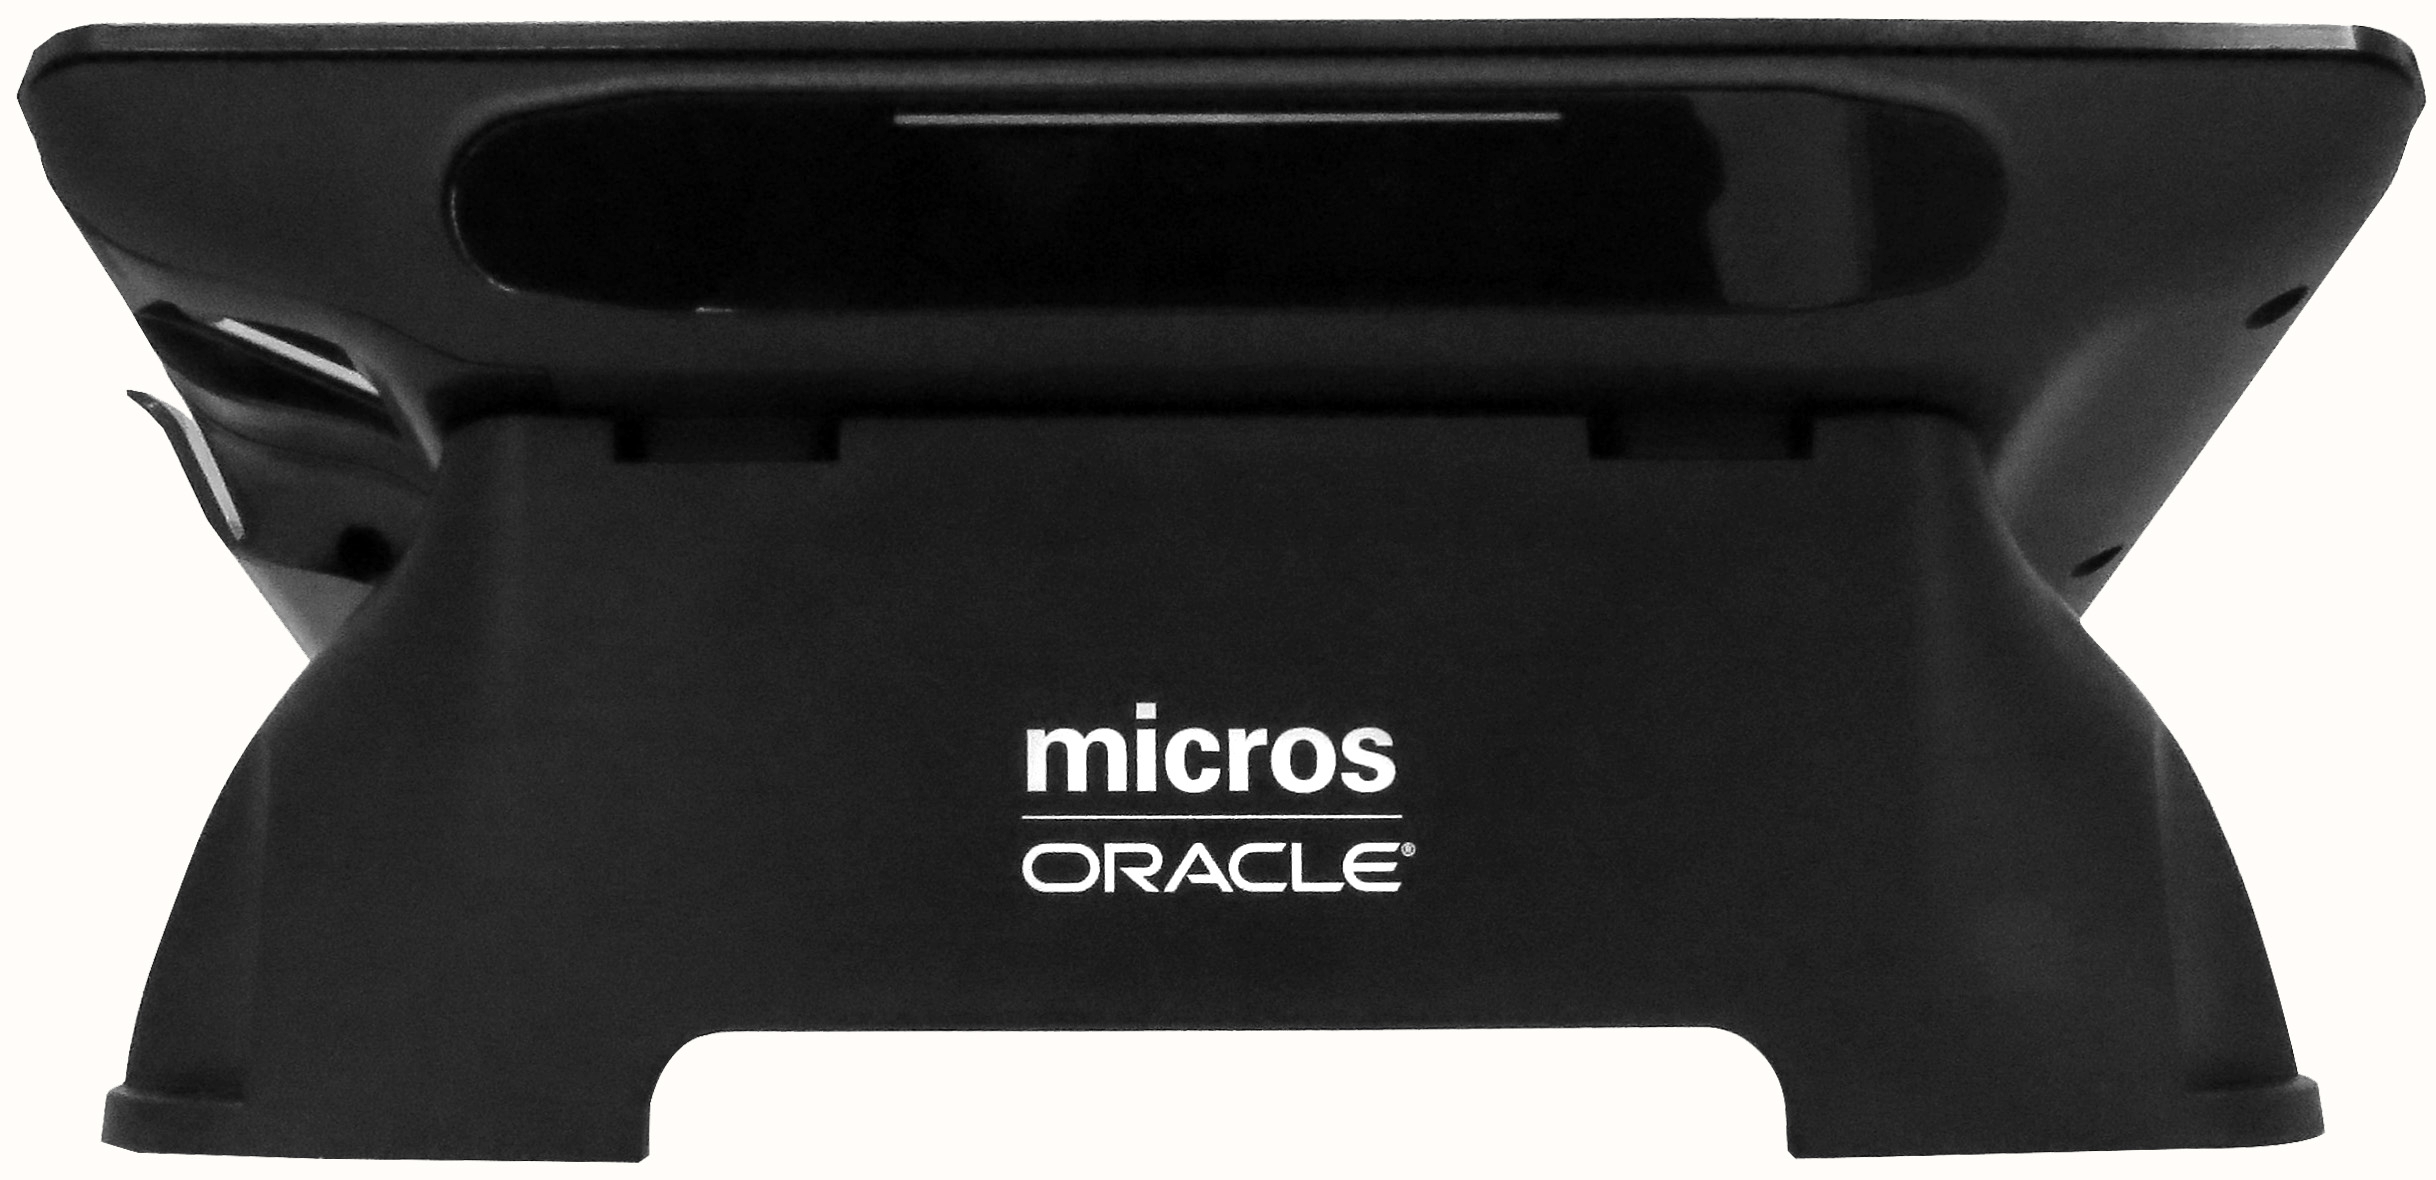 This image shows the MICROS Basic Stand.